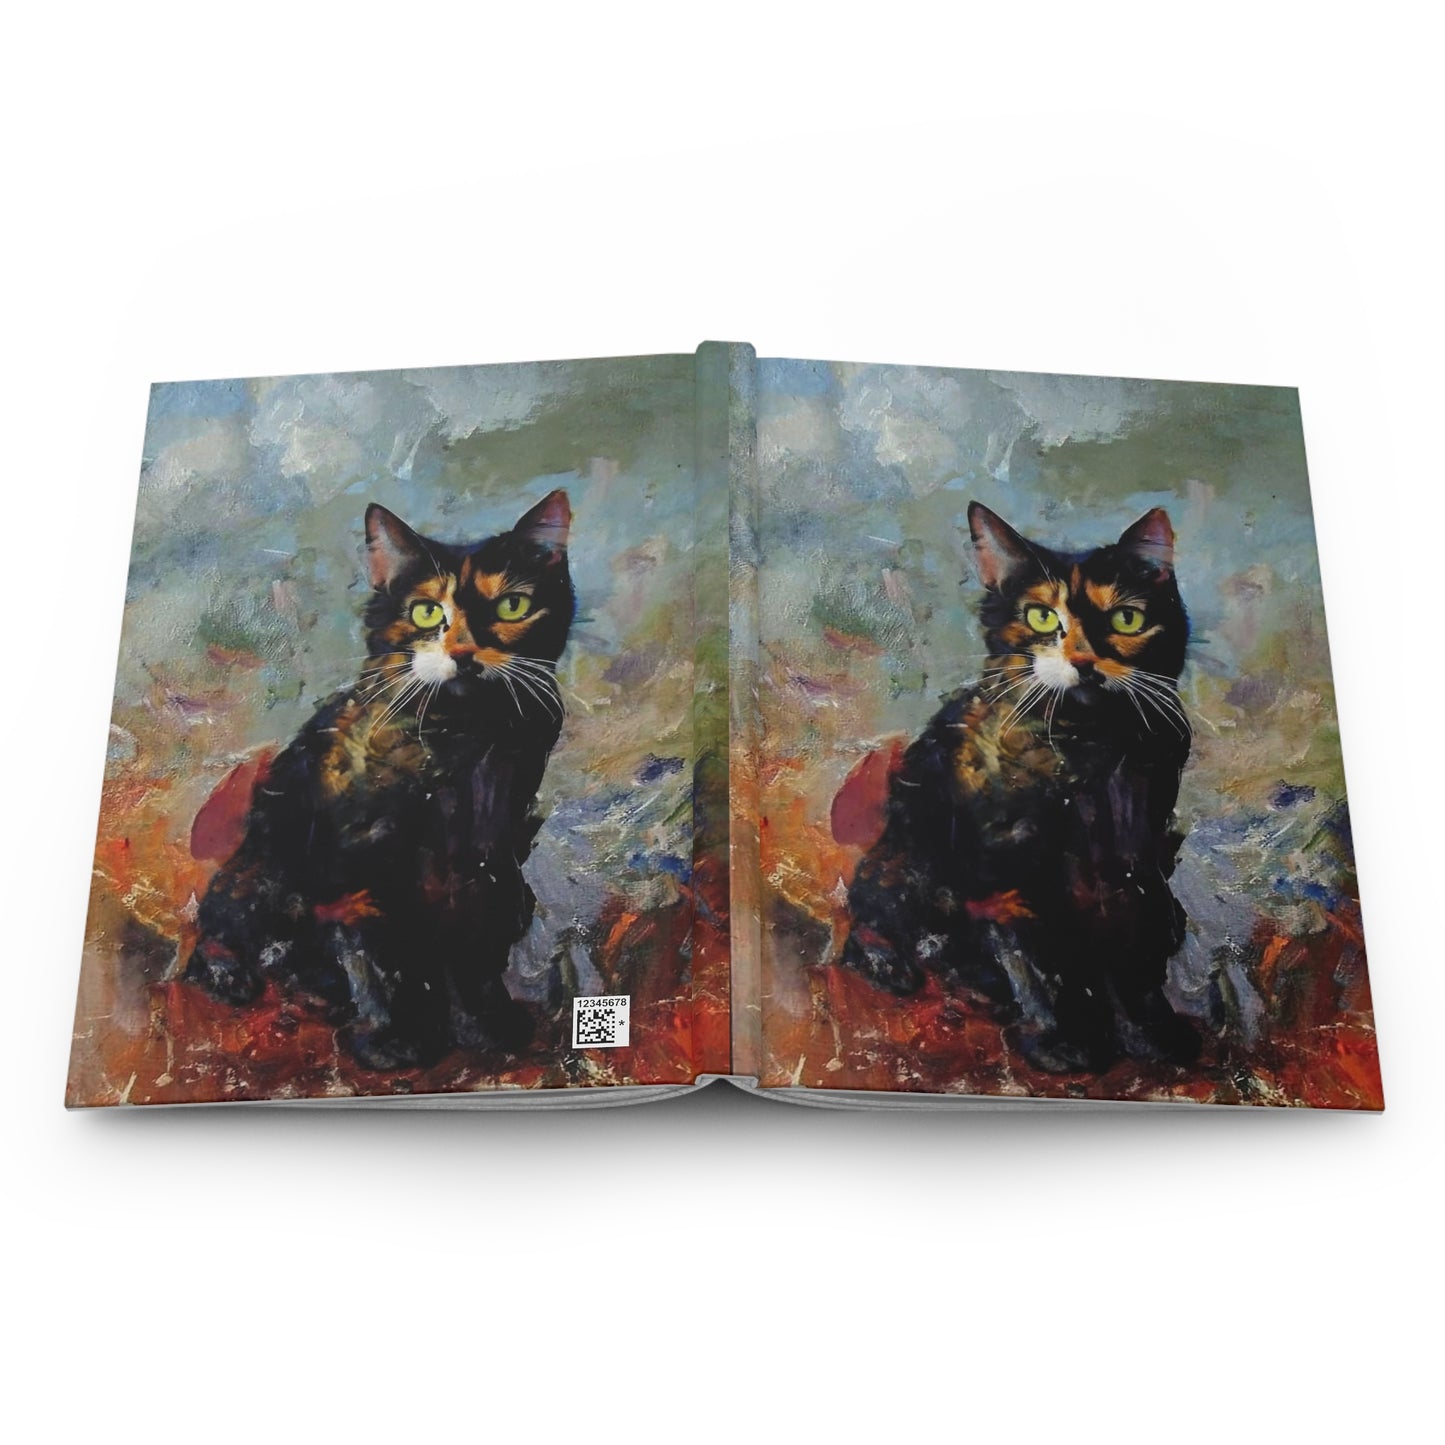 Hardcover Journal Matte with Cat Design cover